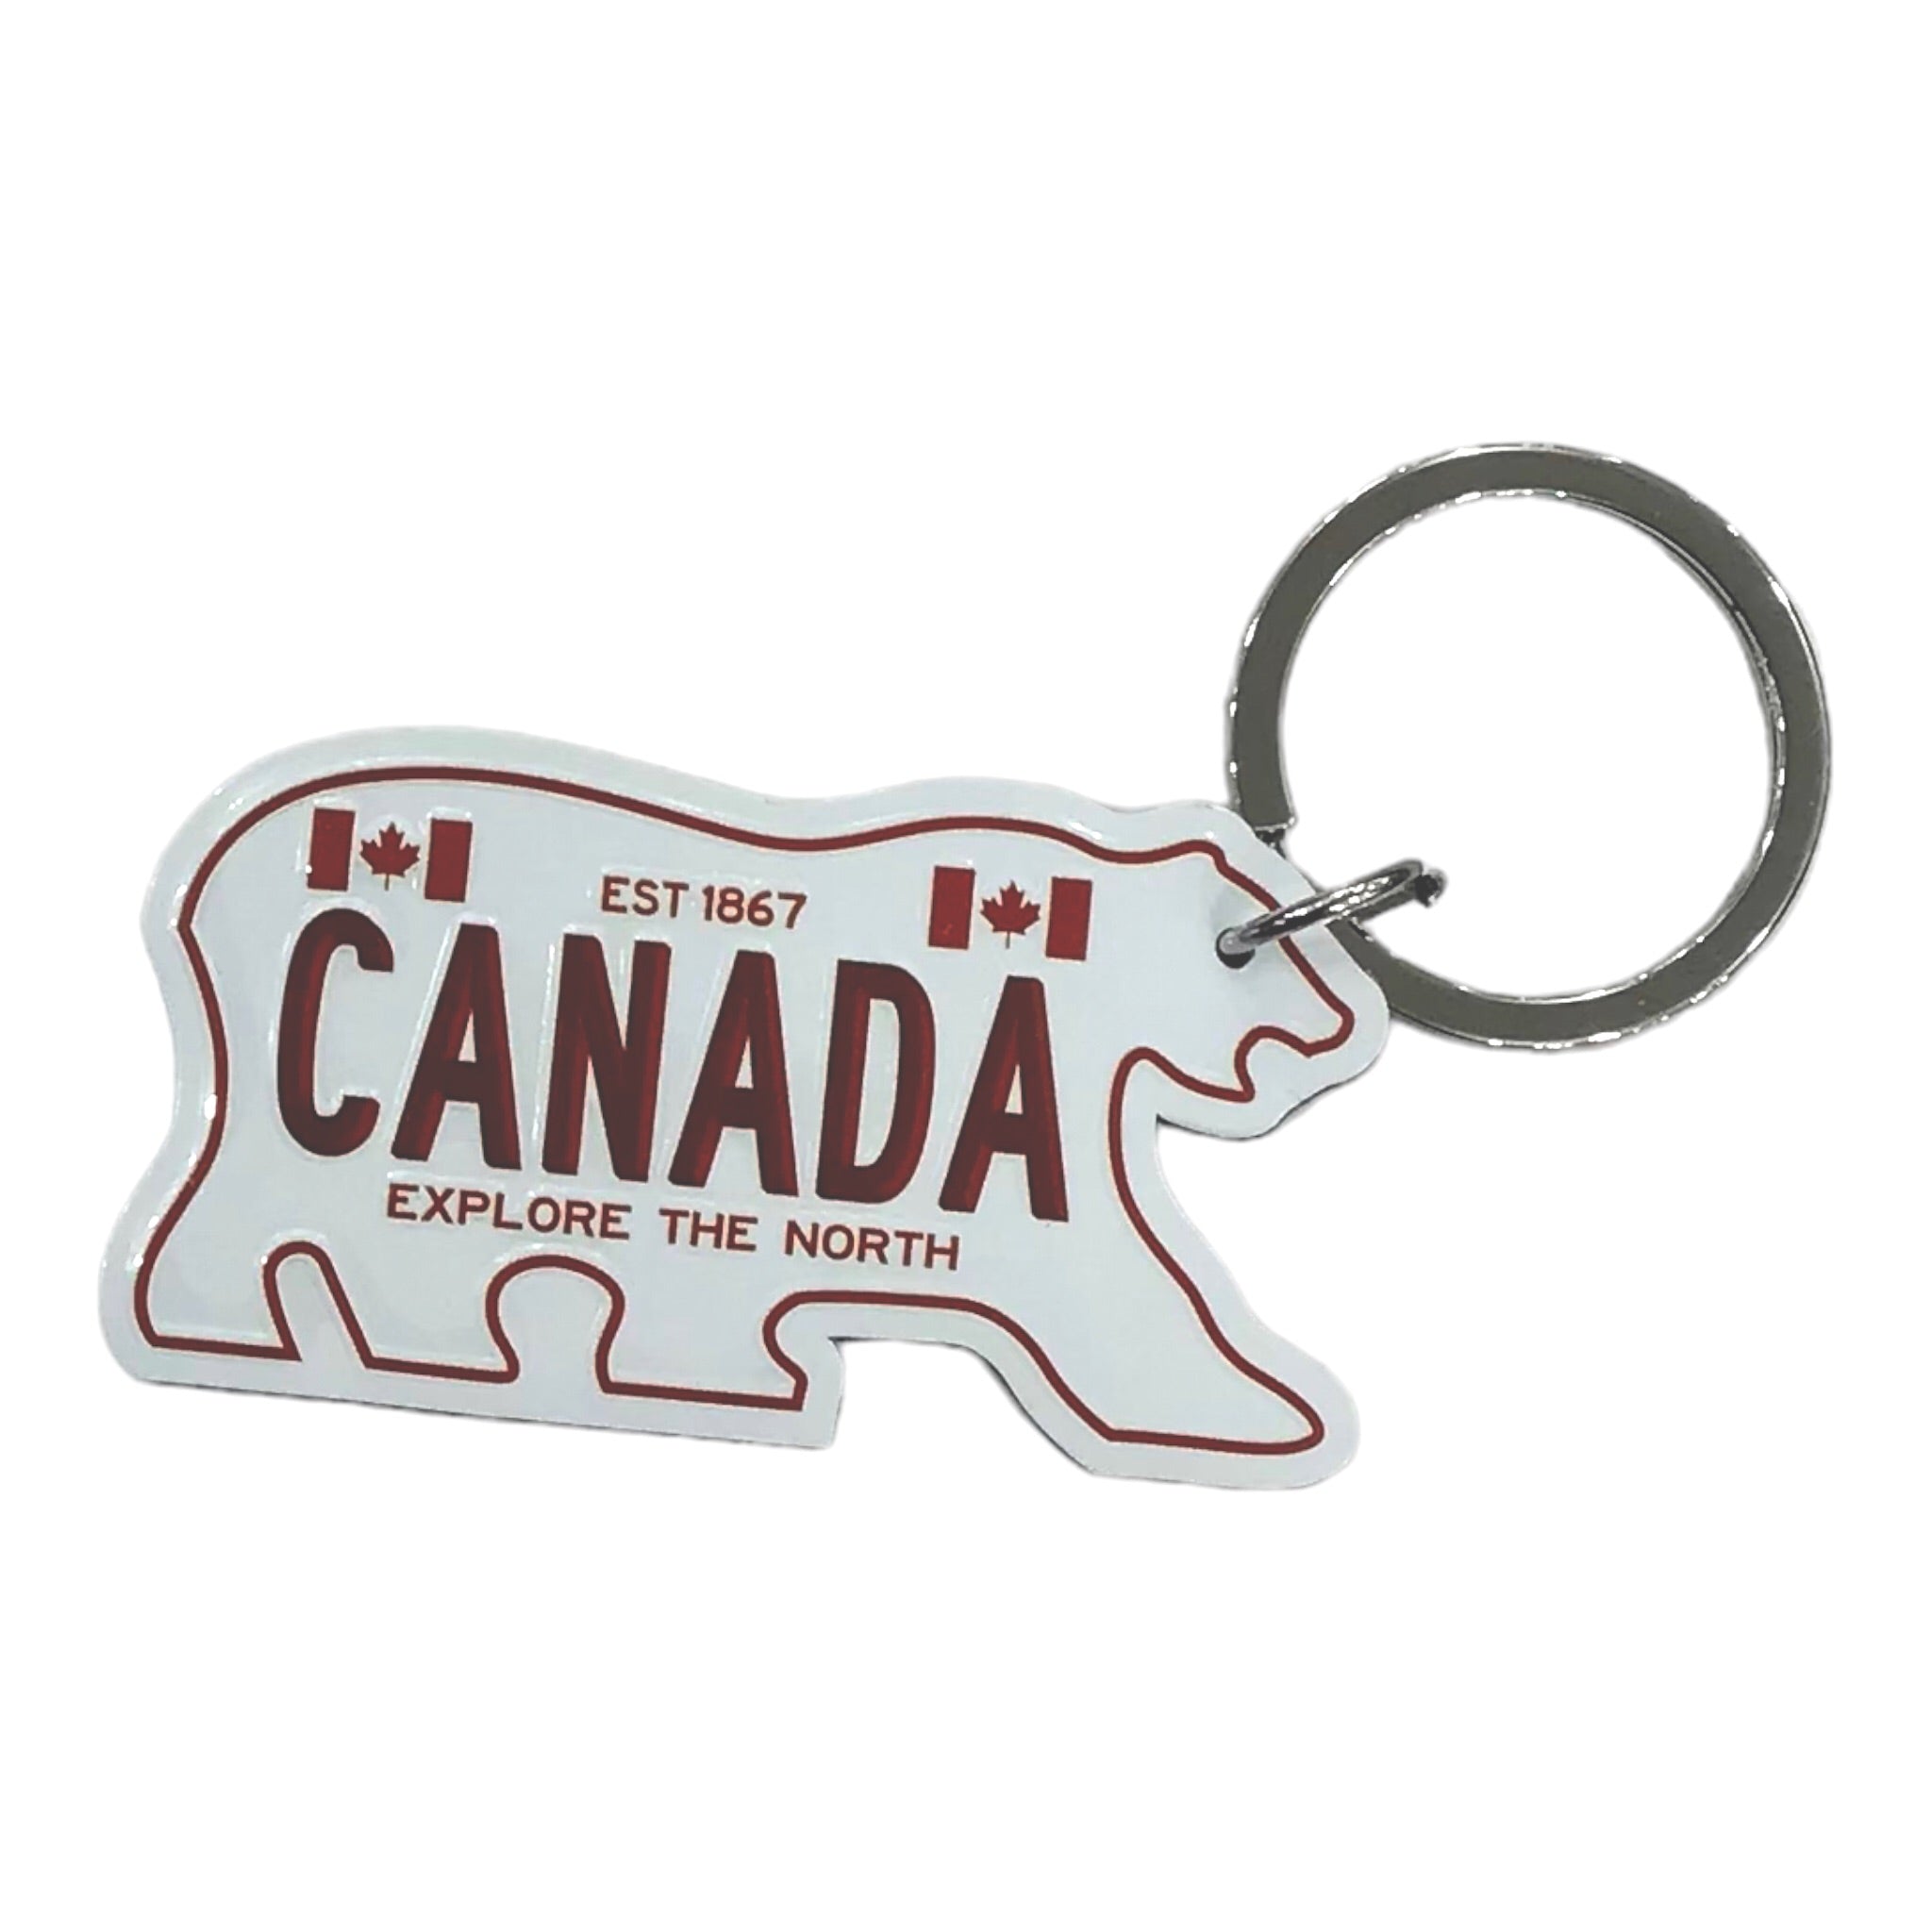 Canada Keychain Double Sided - Explore The North Key Ring Bear Cut Shaped